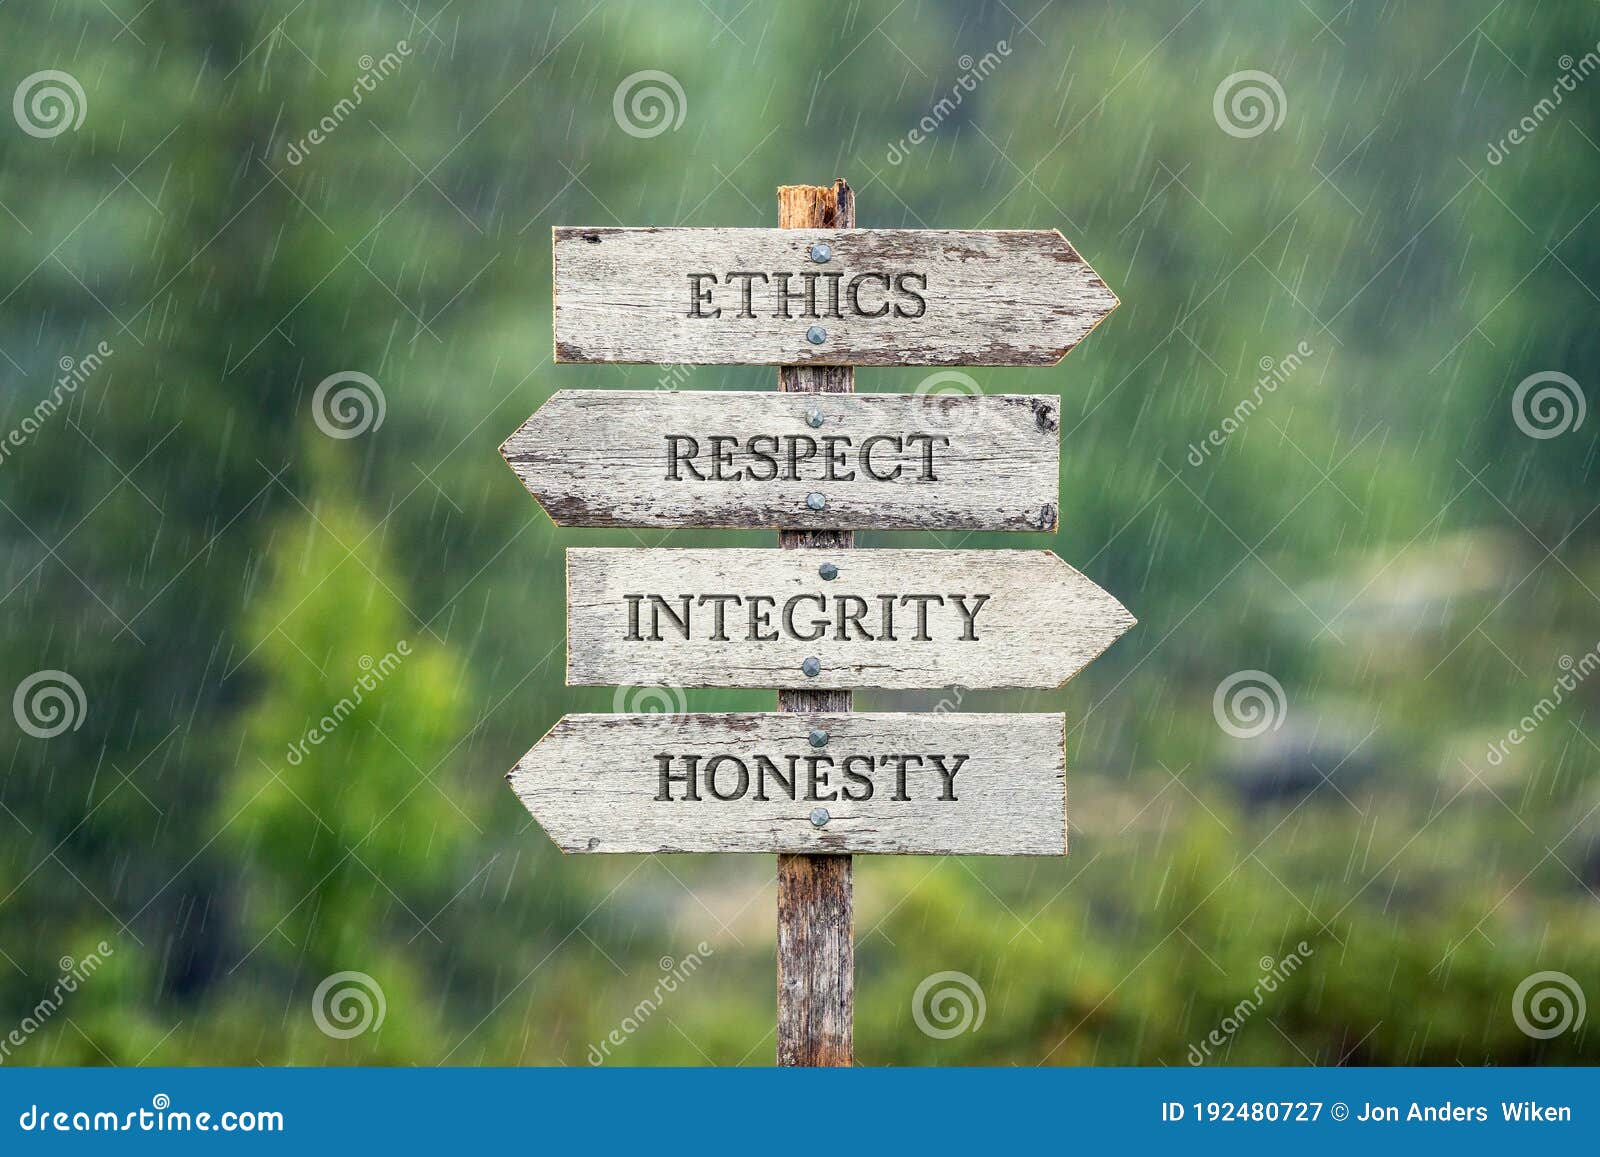 ethics respect integrity honesty text on wooden signpost outdoors in the rain